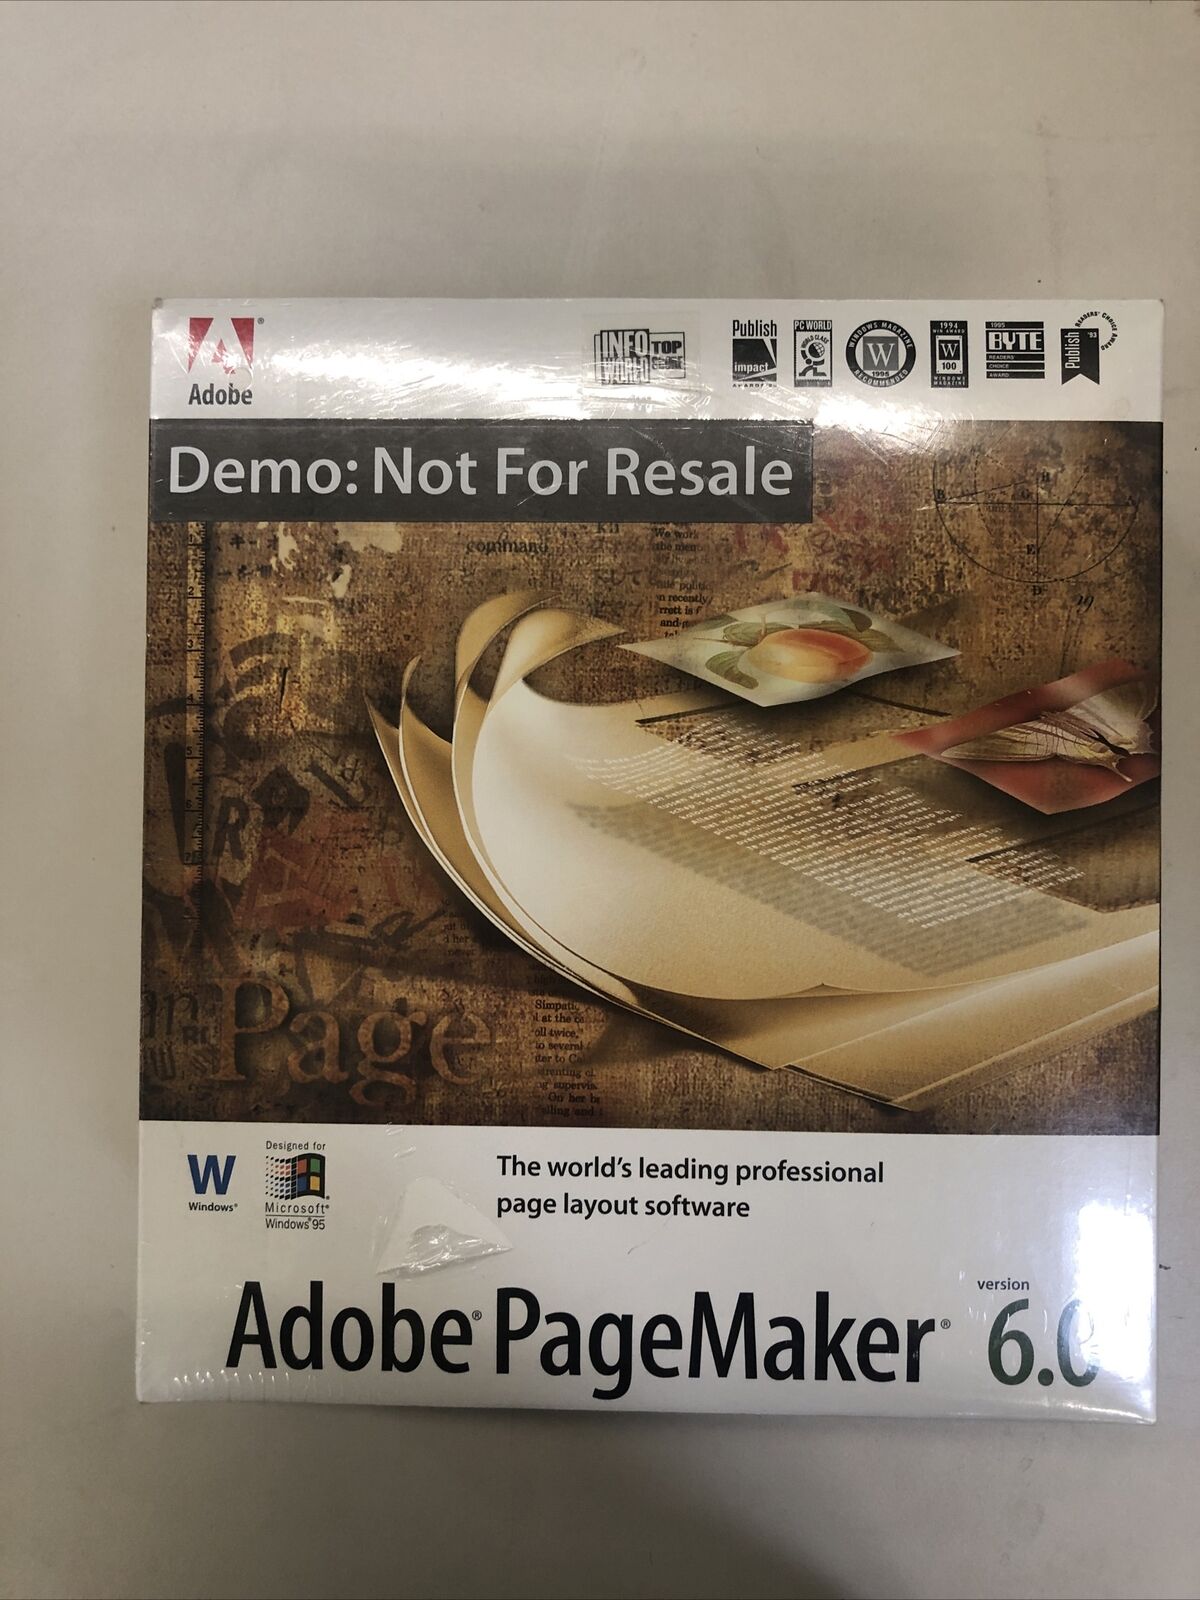 VINTAGE ADOBE PAGEMAKER 6.0 FOR WINDOWS 95 CD SEALED - PREOWNED